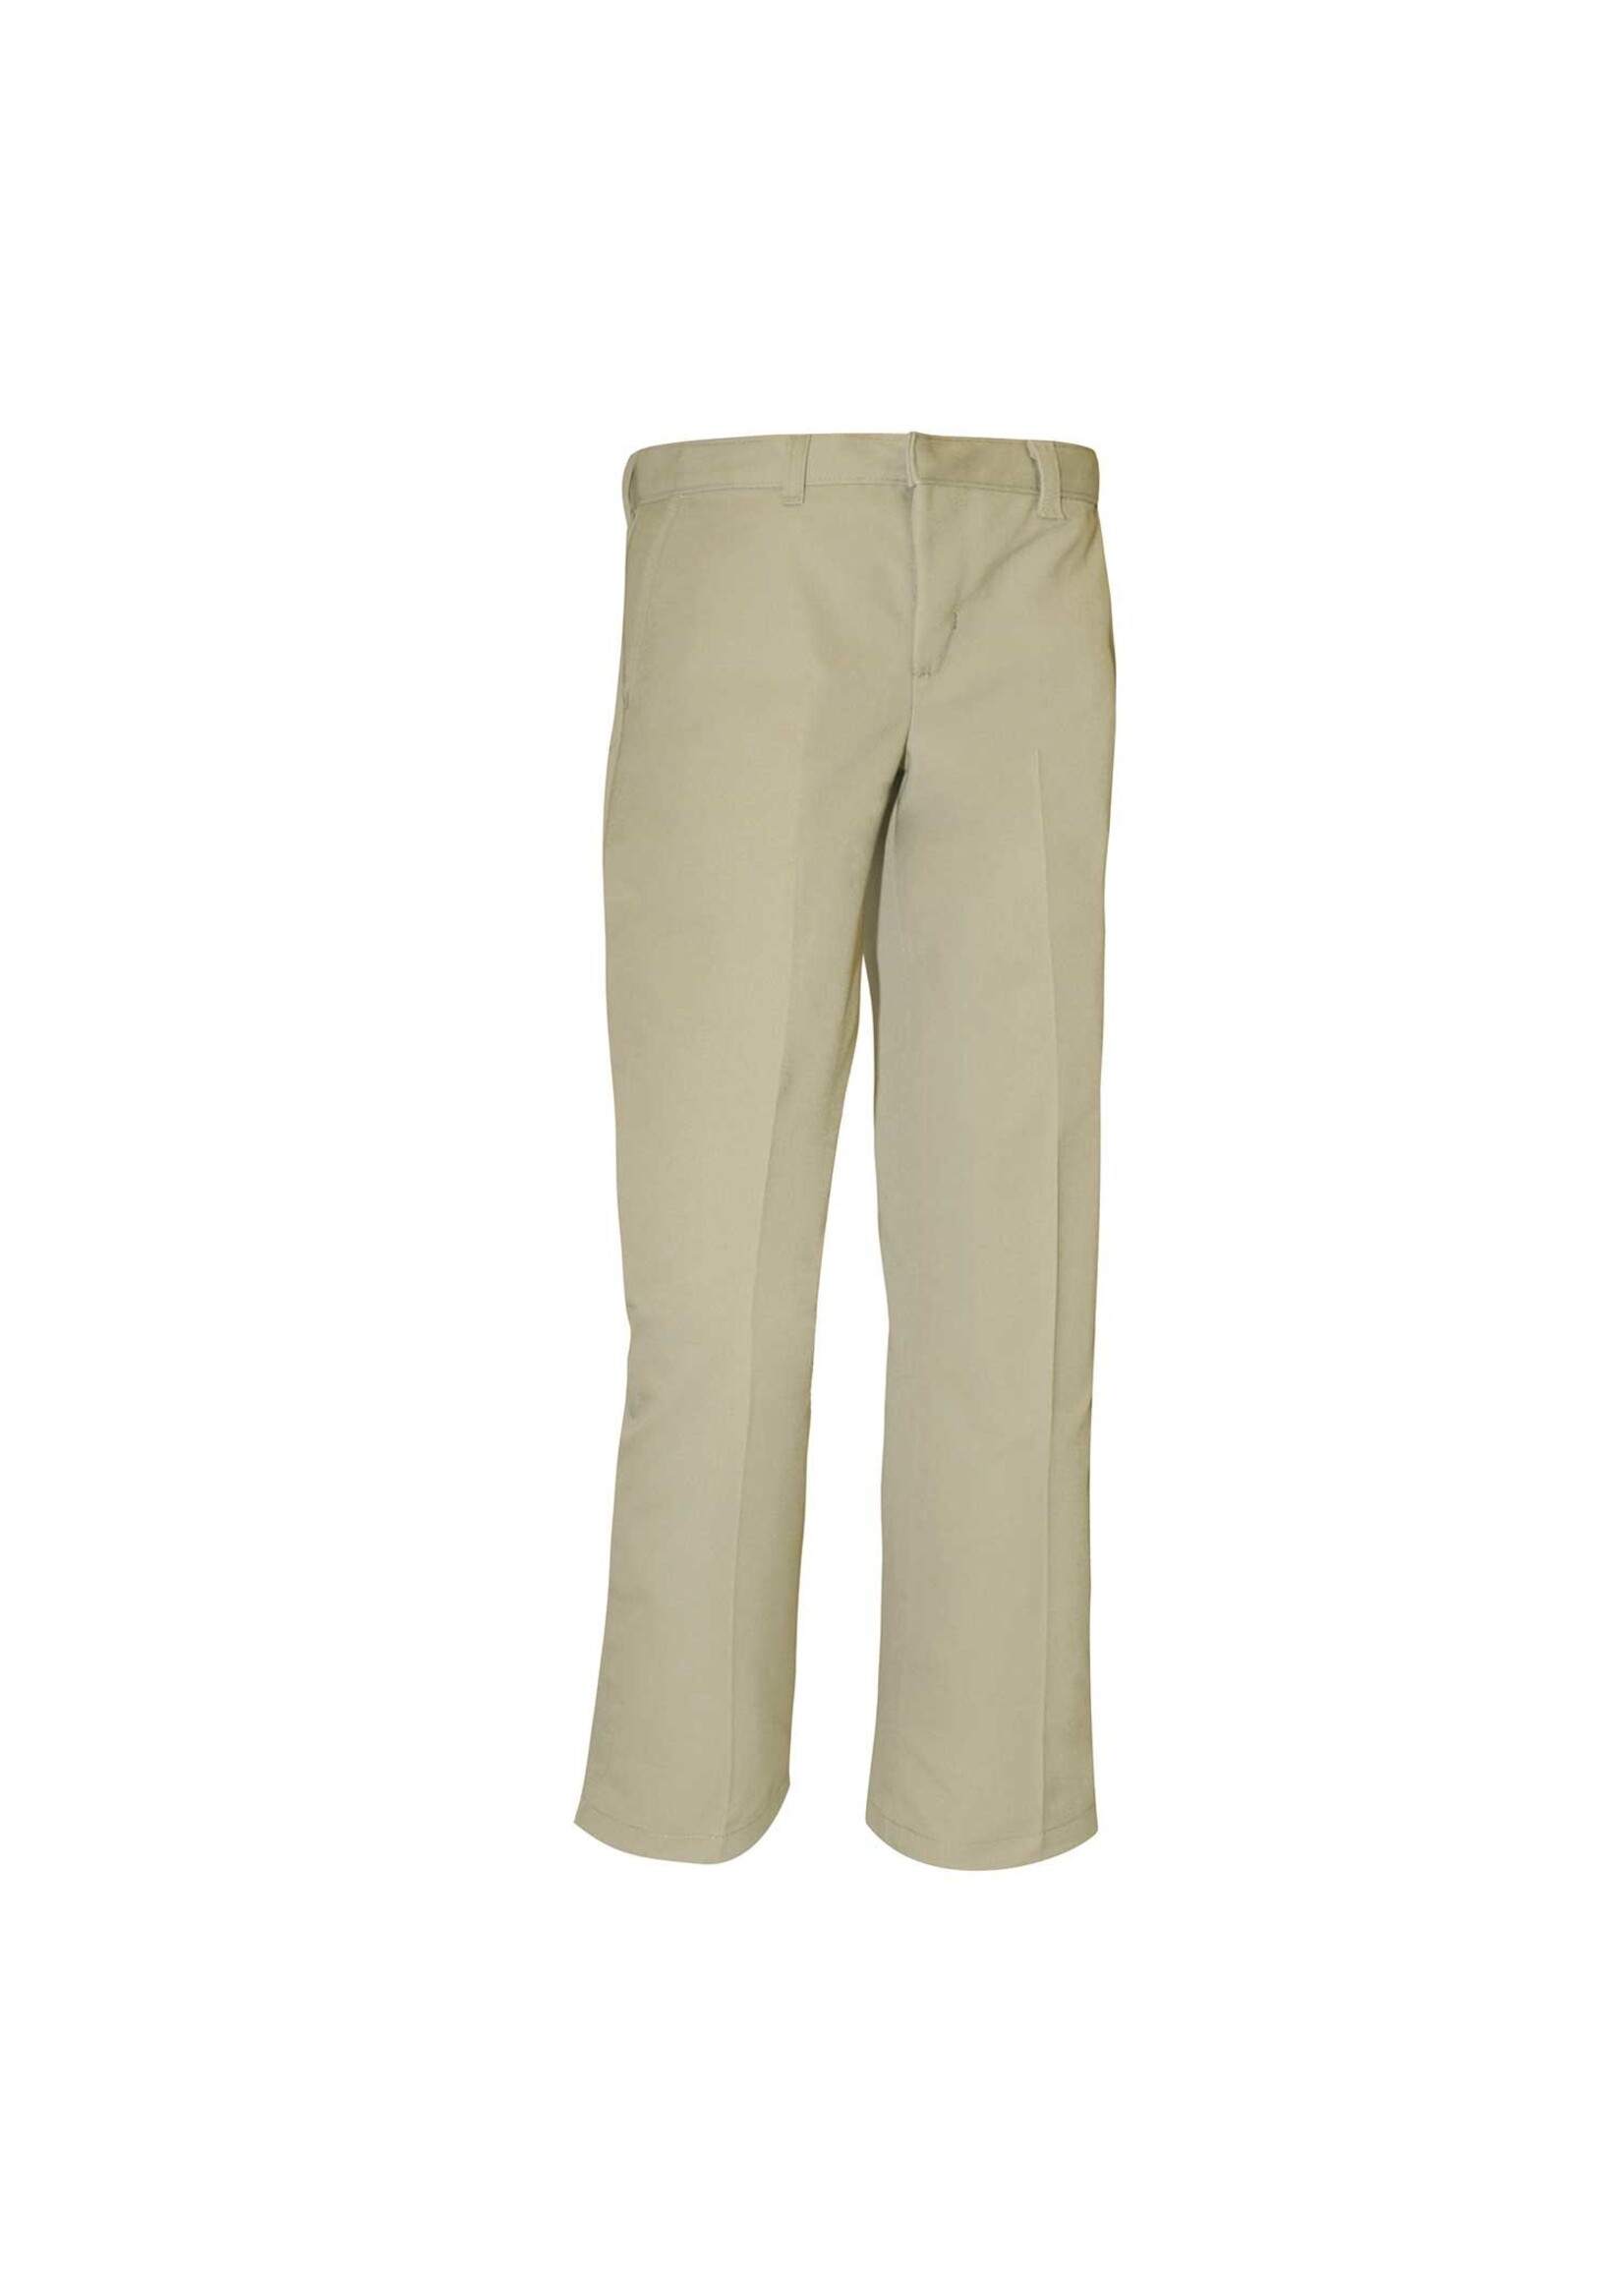 Boys Flat Front Pants (KN) with logo